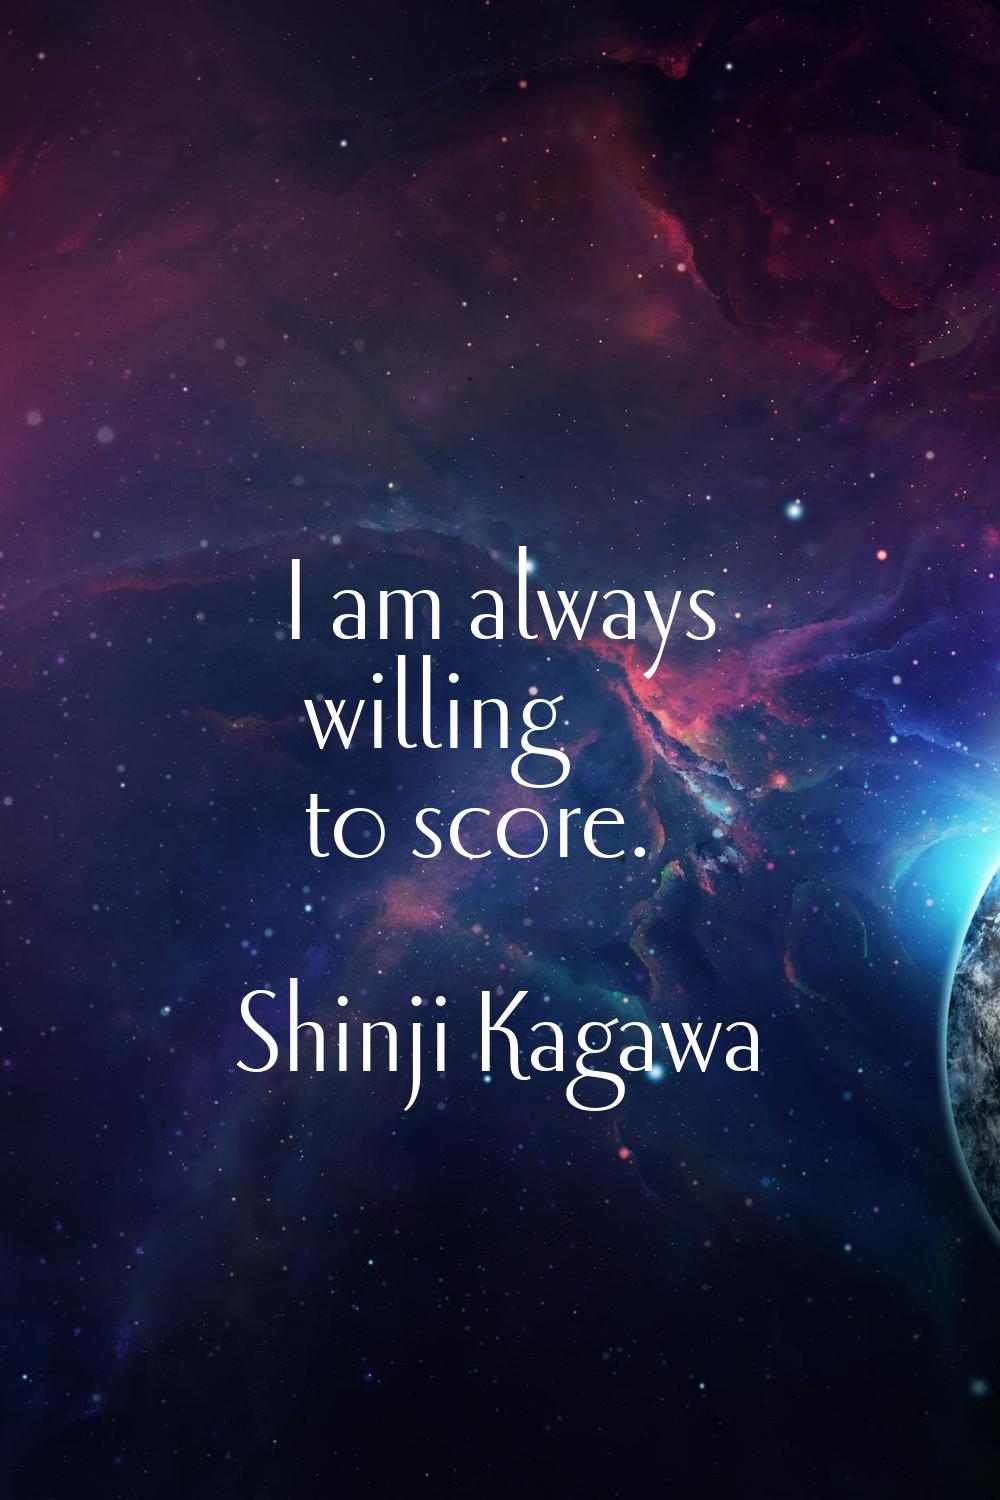 I am always willing to score.